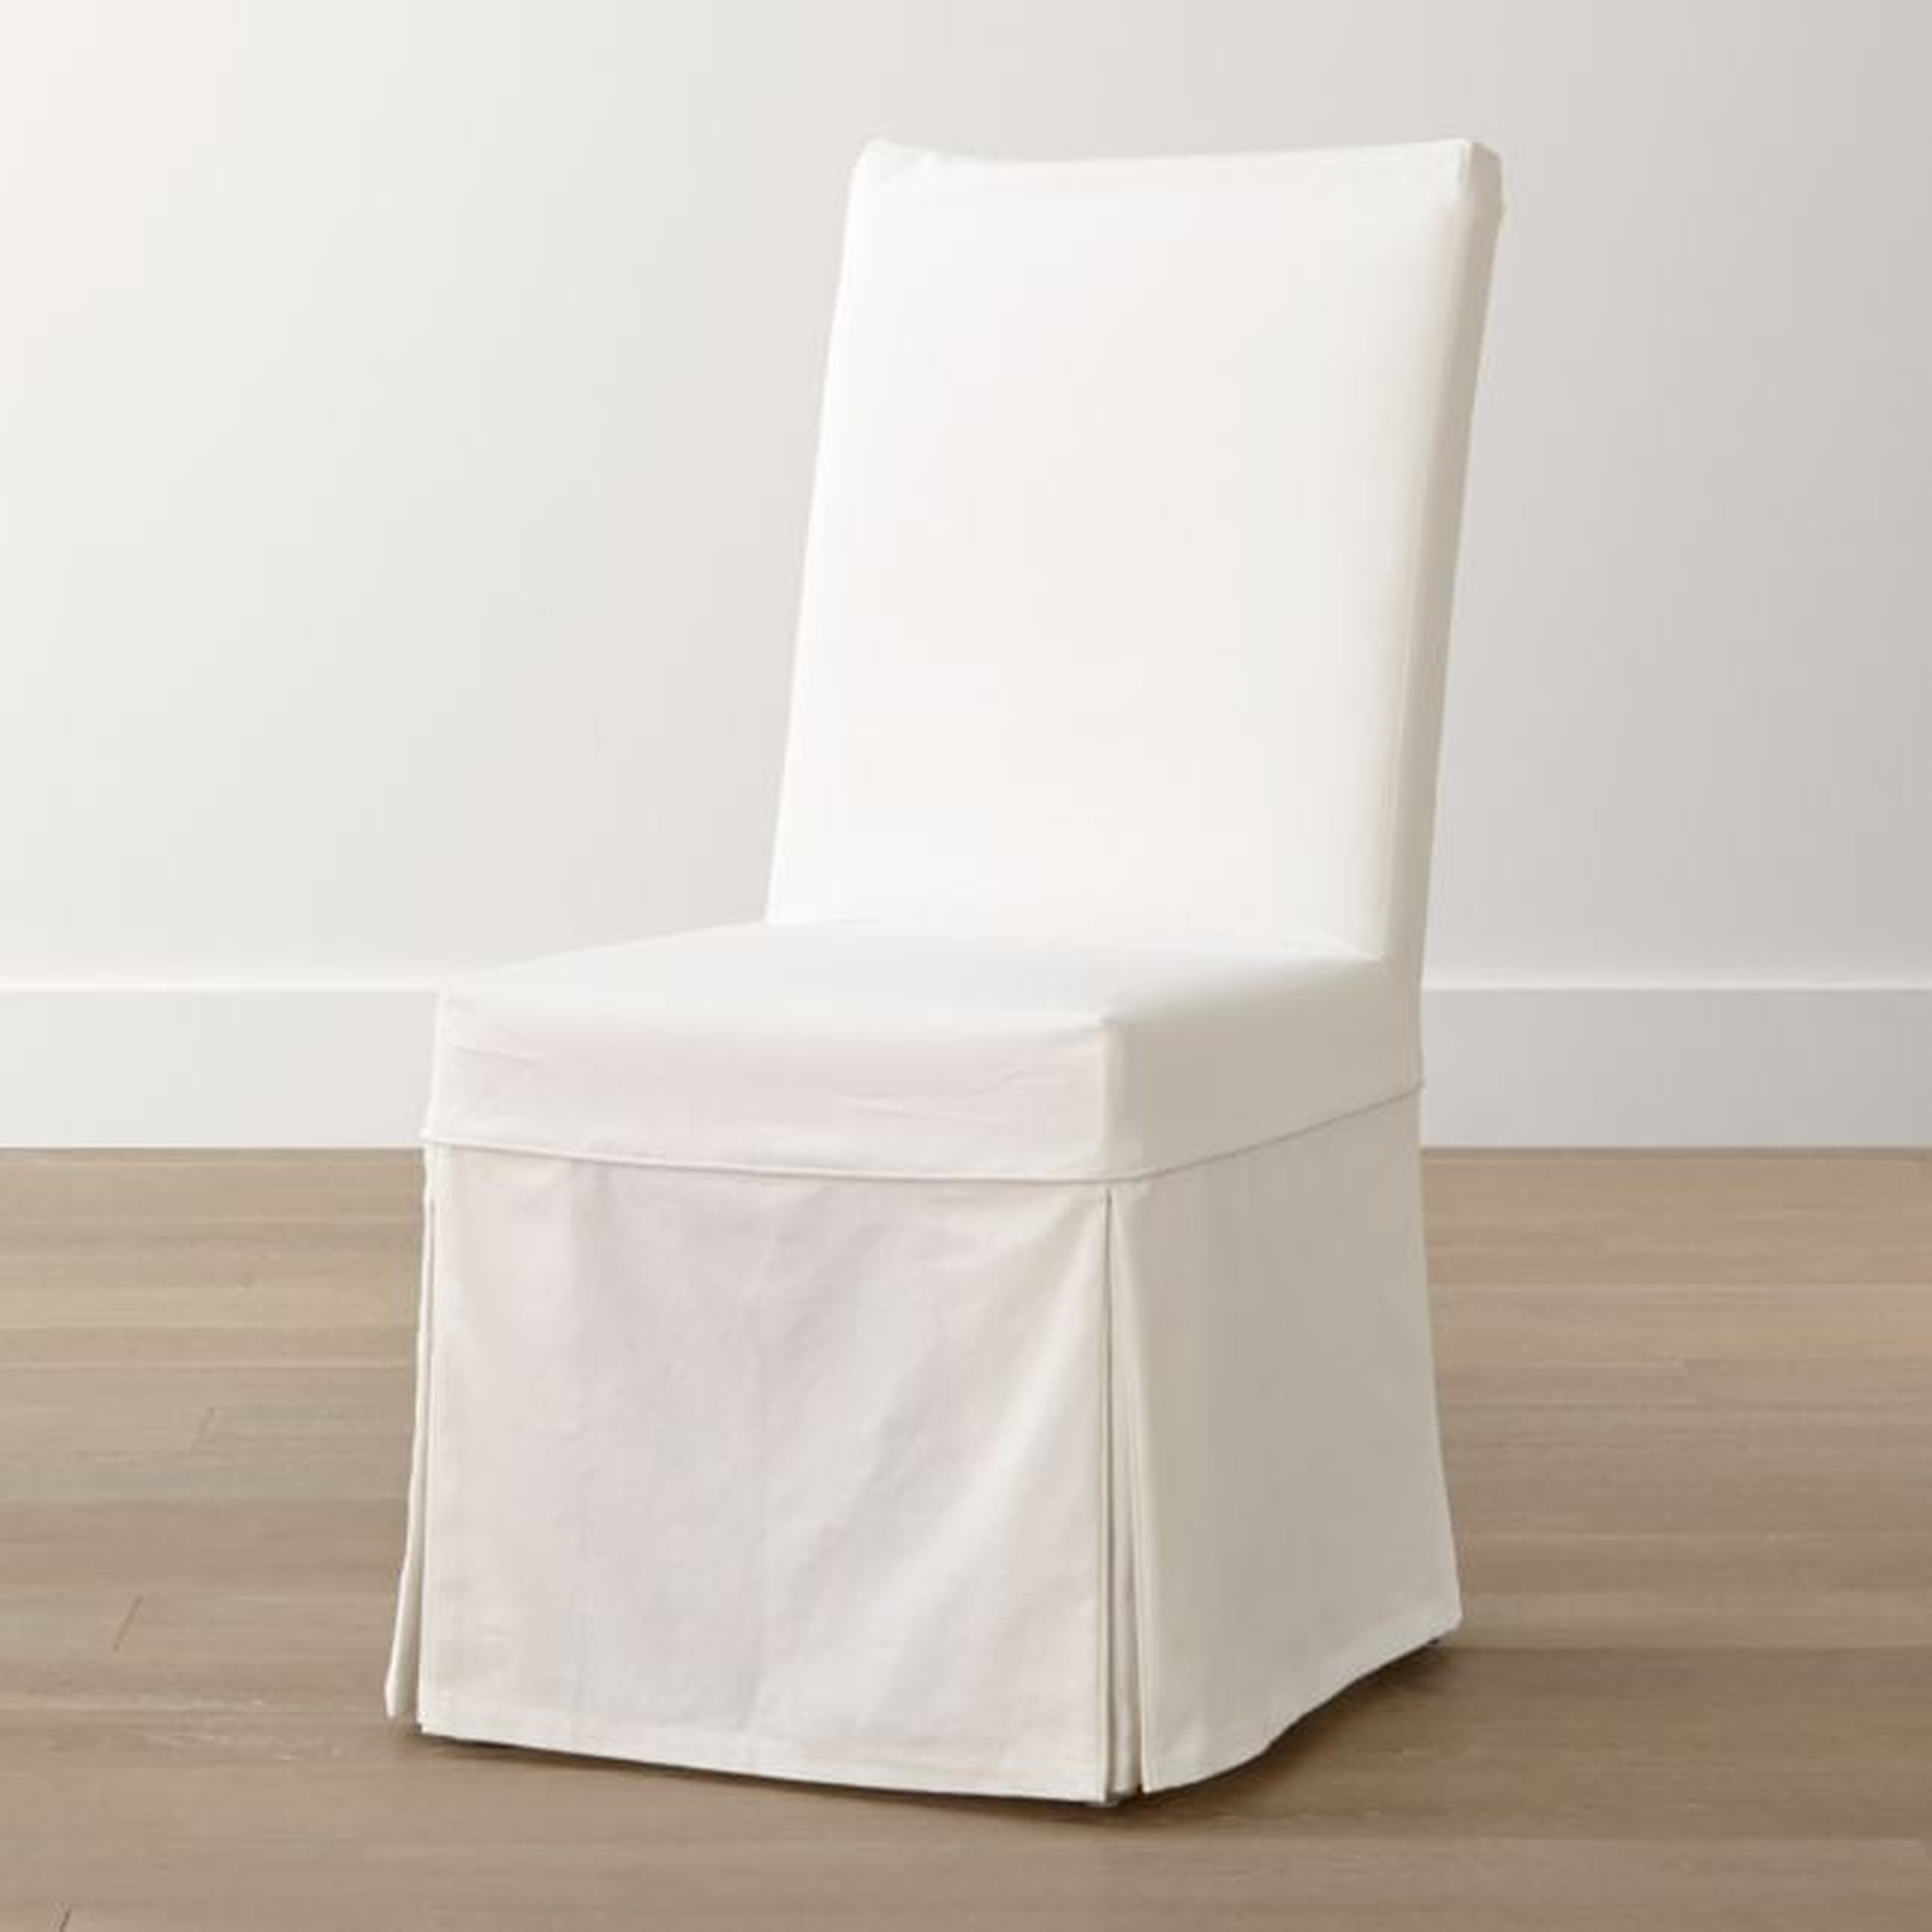 Slip White Slipcovered Dining Chair - Crate and Barrel